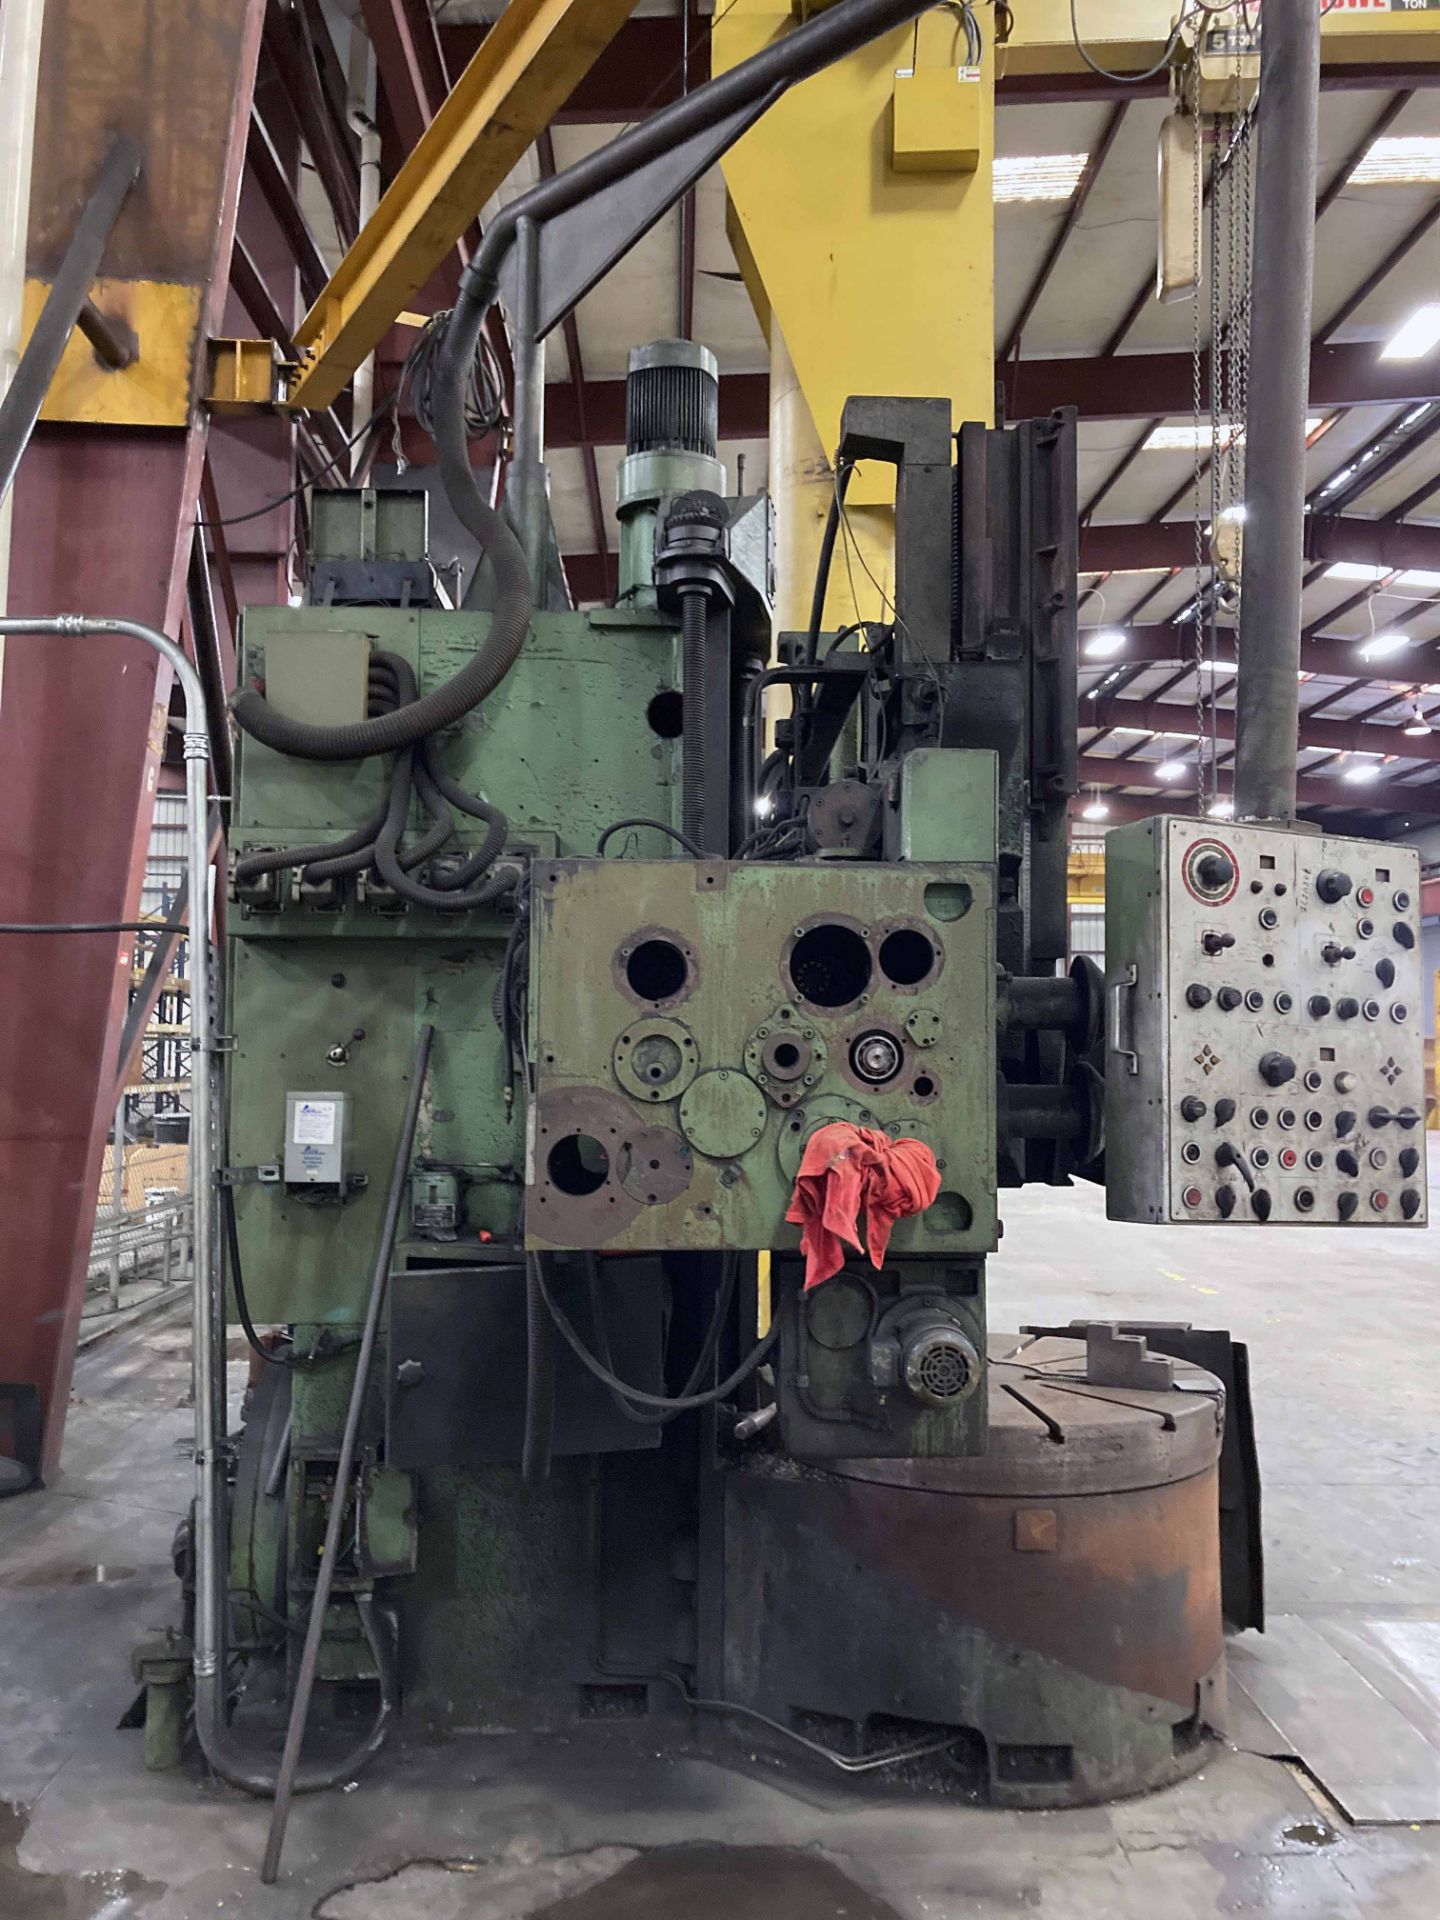 VERTICAL BORING MILL, FRORIEP 56", 3-jaw chuck, dbl. 4-sided turrets, pendant control (out of - Image 4 of 4